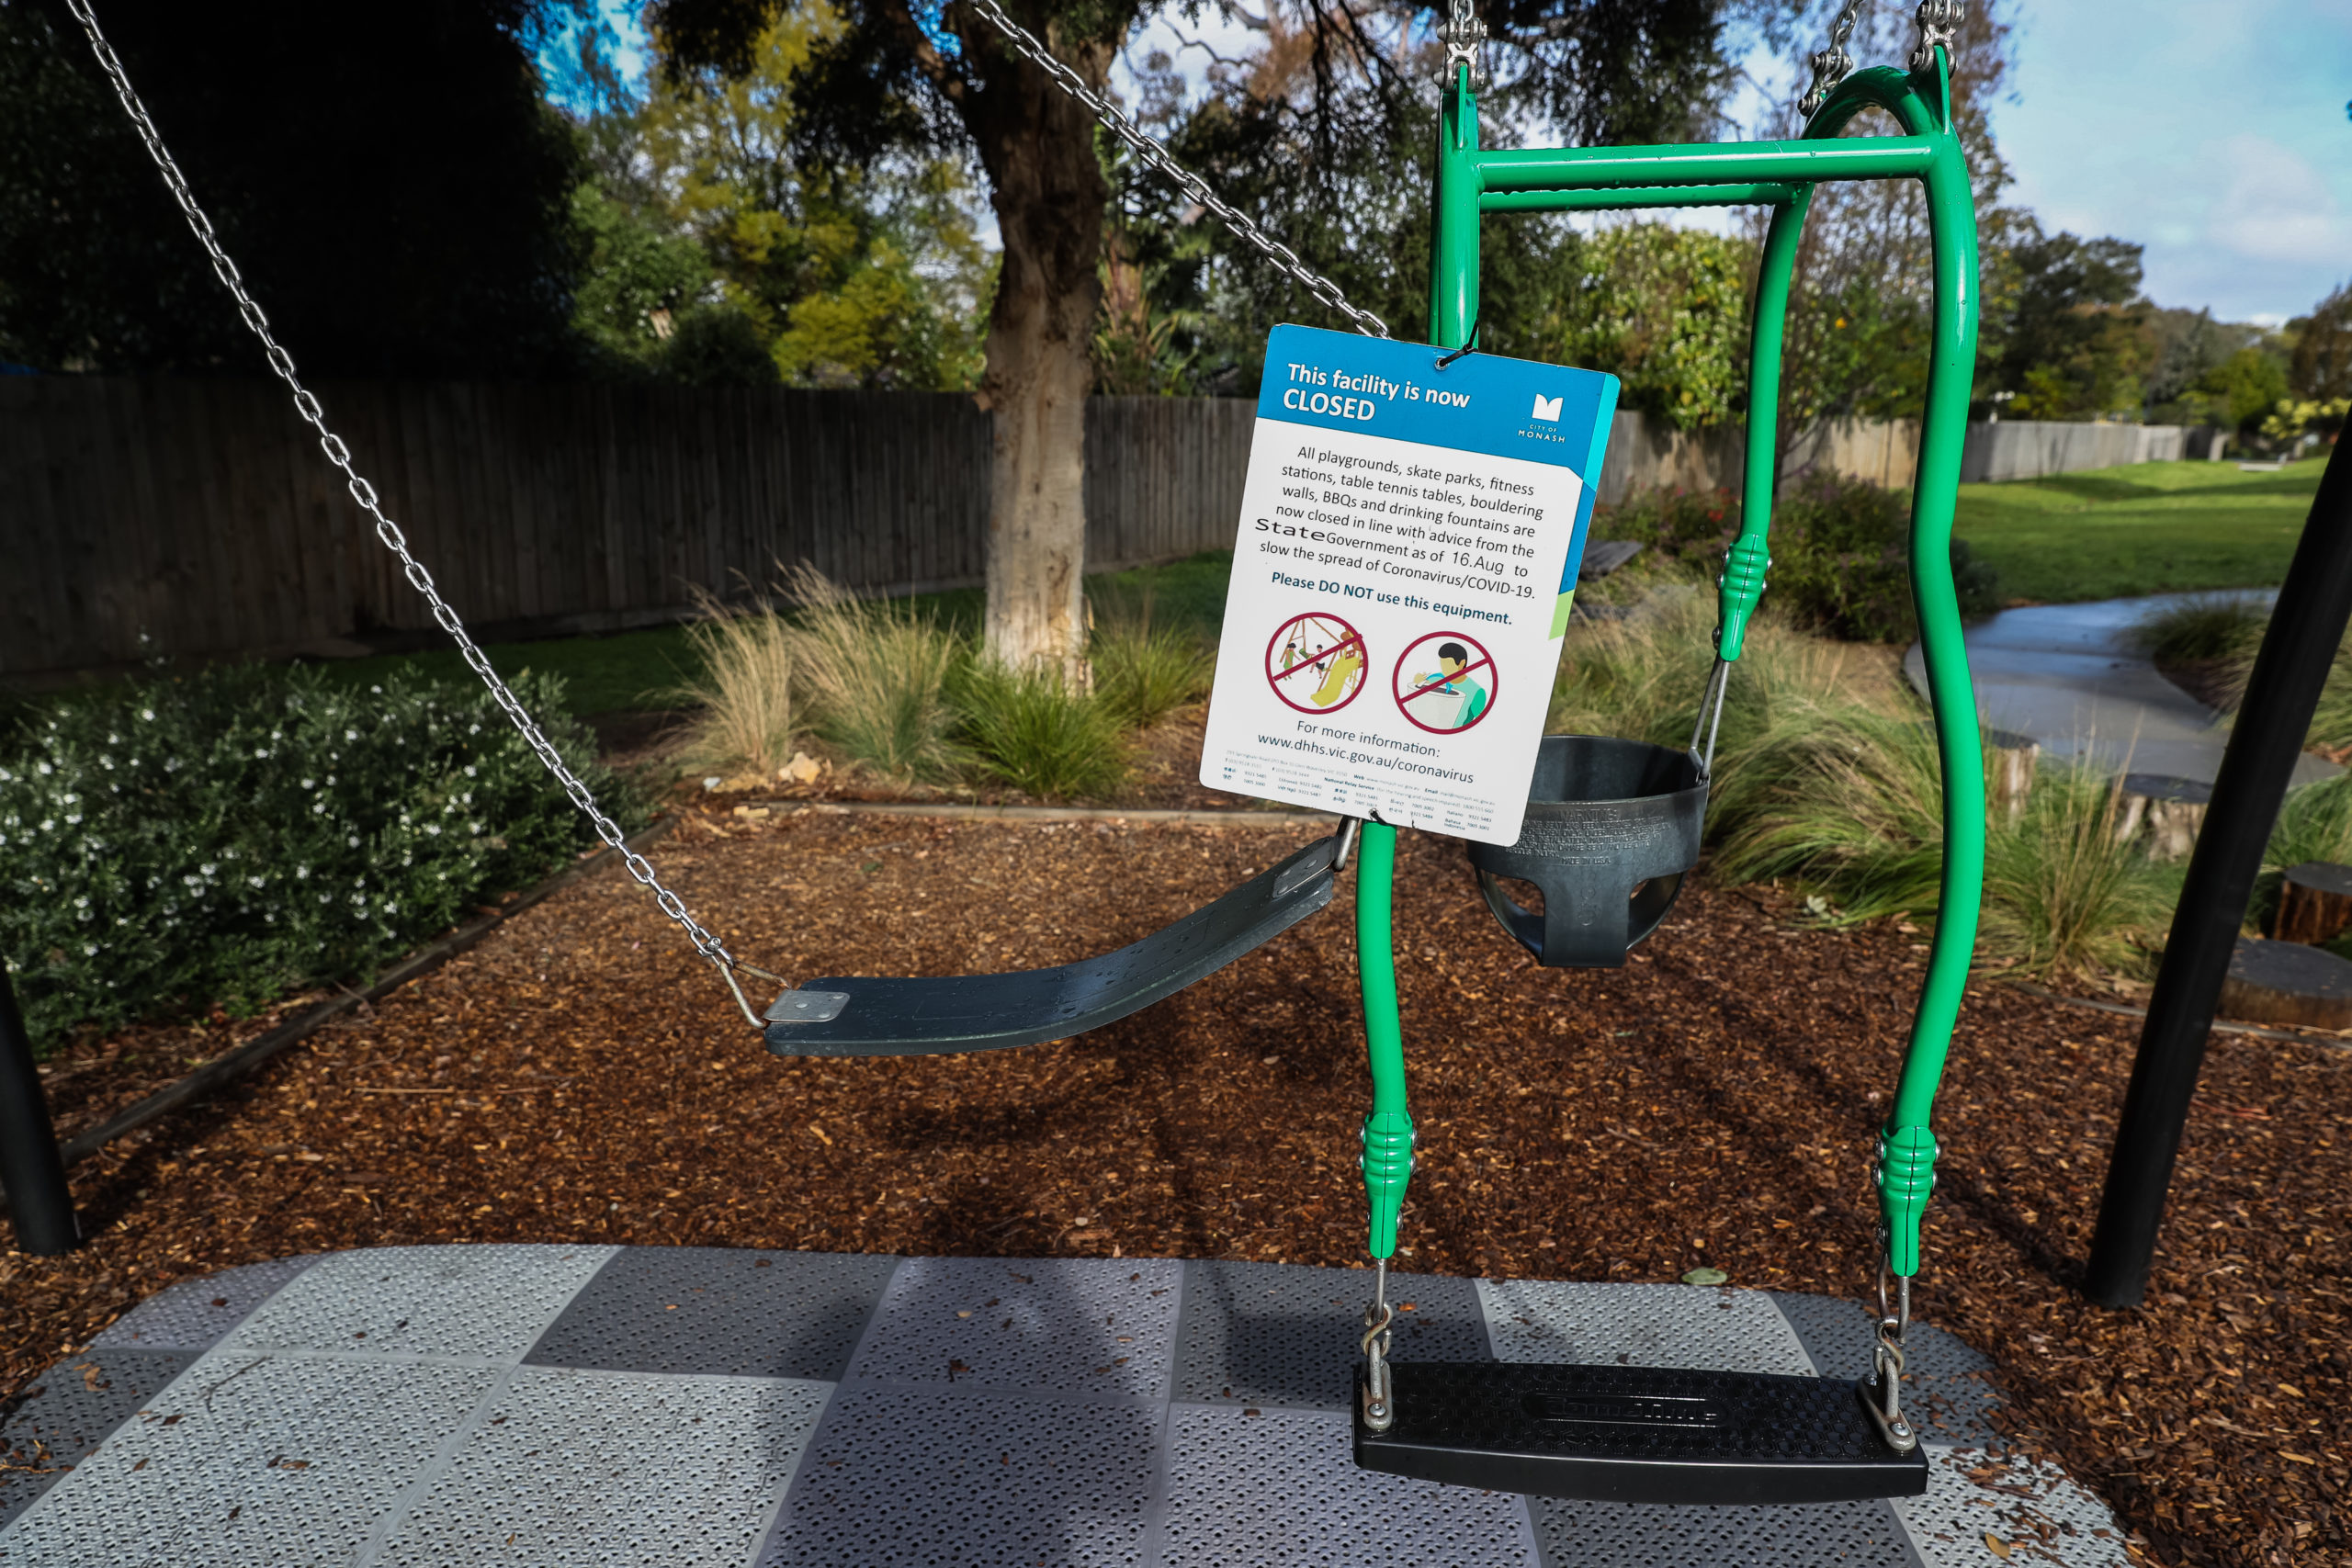 Two swings are seen tied together with a sign advising the closure of a playground in the city of Monash on August 17, 2021 in Melbourne, Australia. (Photo by Asanka Ratnayake/Getty Images)